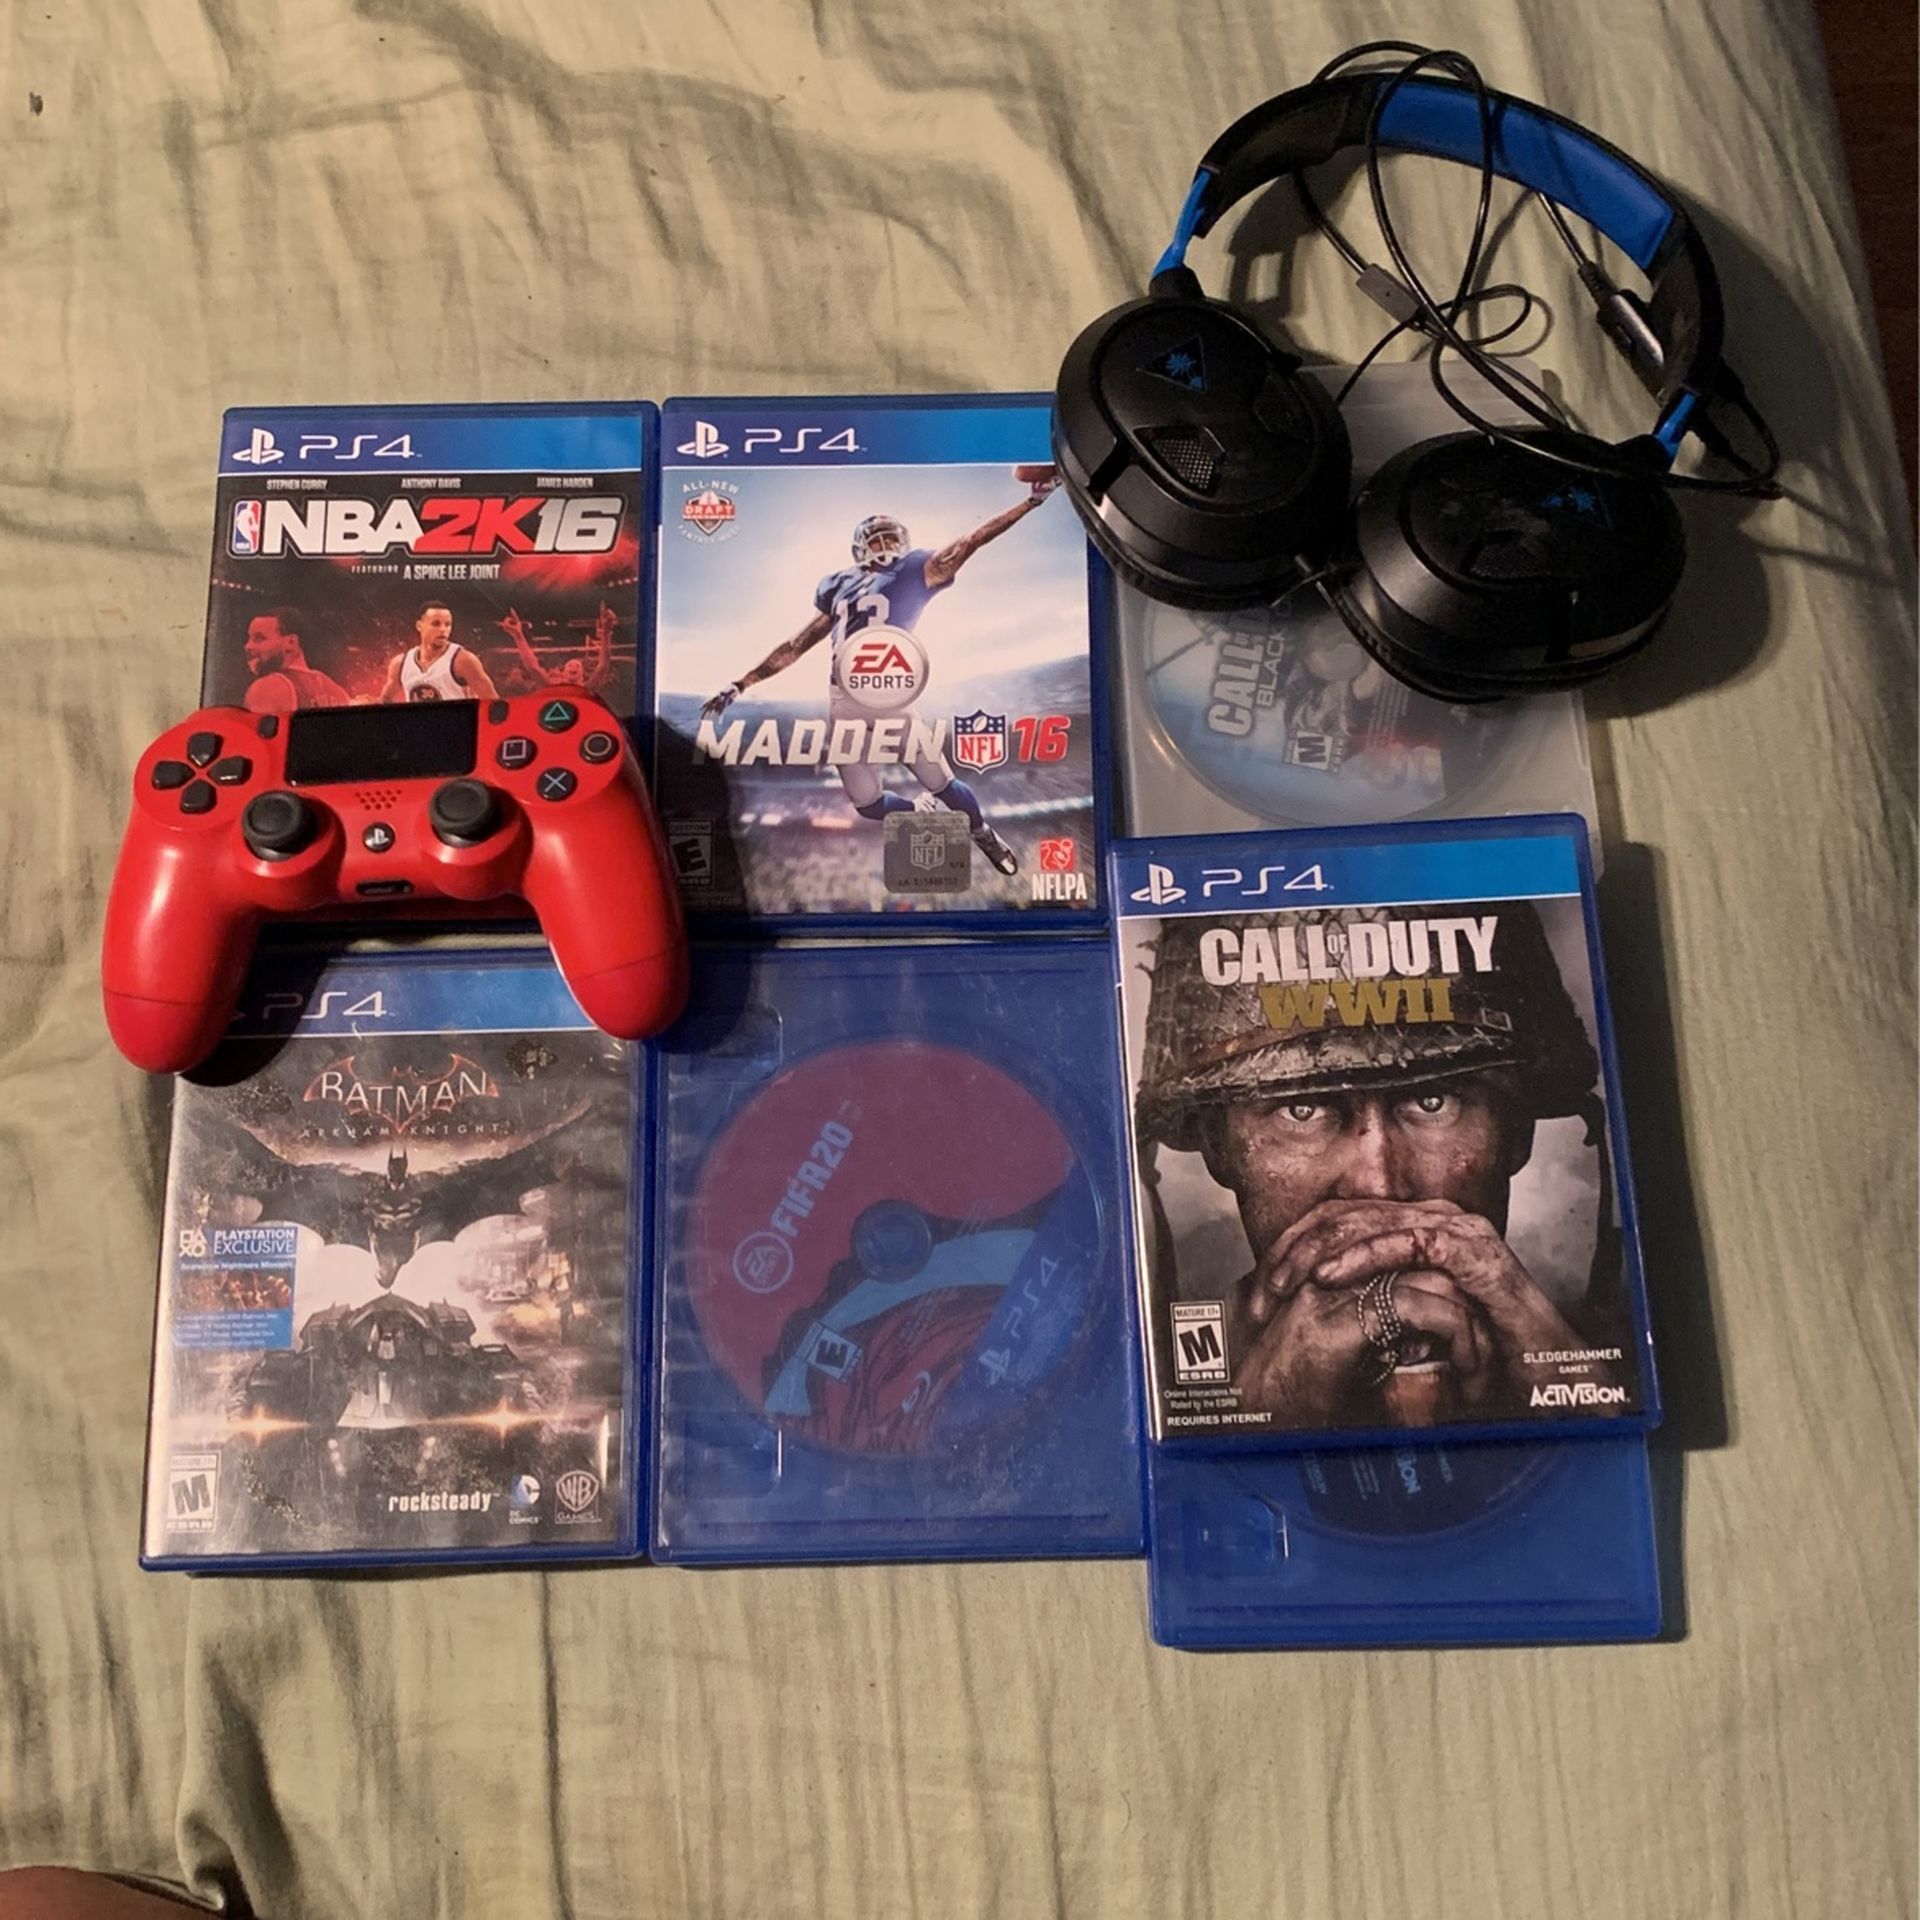 PS4 Games  Fifa 20 2 Call Of Duty WW2 Batman Arkham Knight 2k16 Madden 16 Ps3 Black Ops 1 Turtle Beaches And Red PS4 Controller 